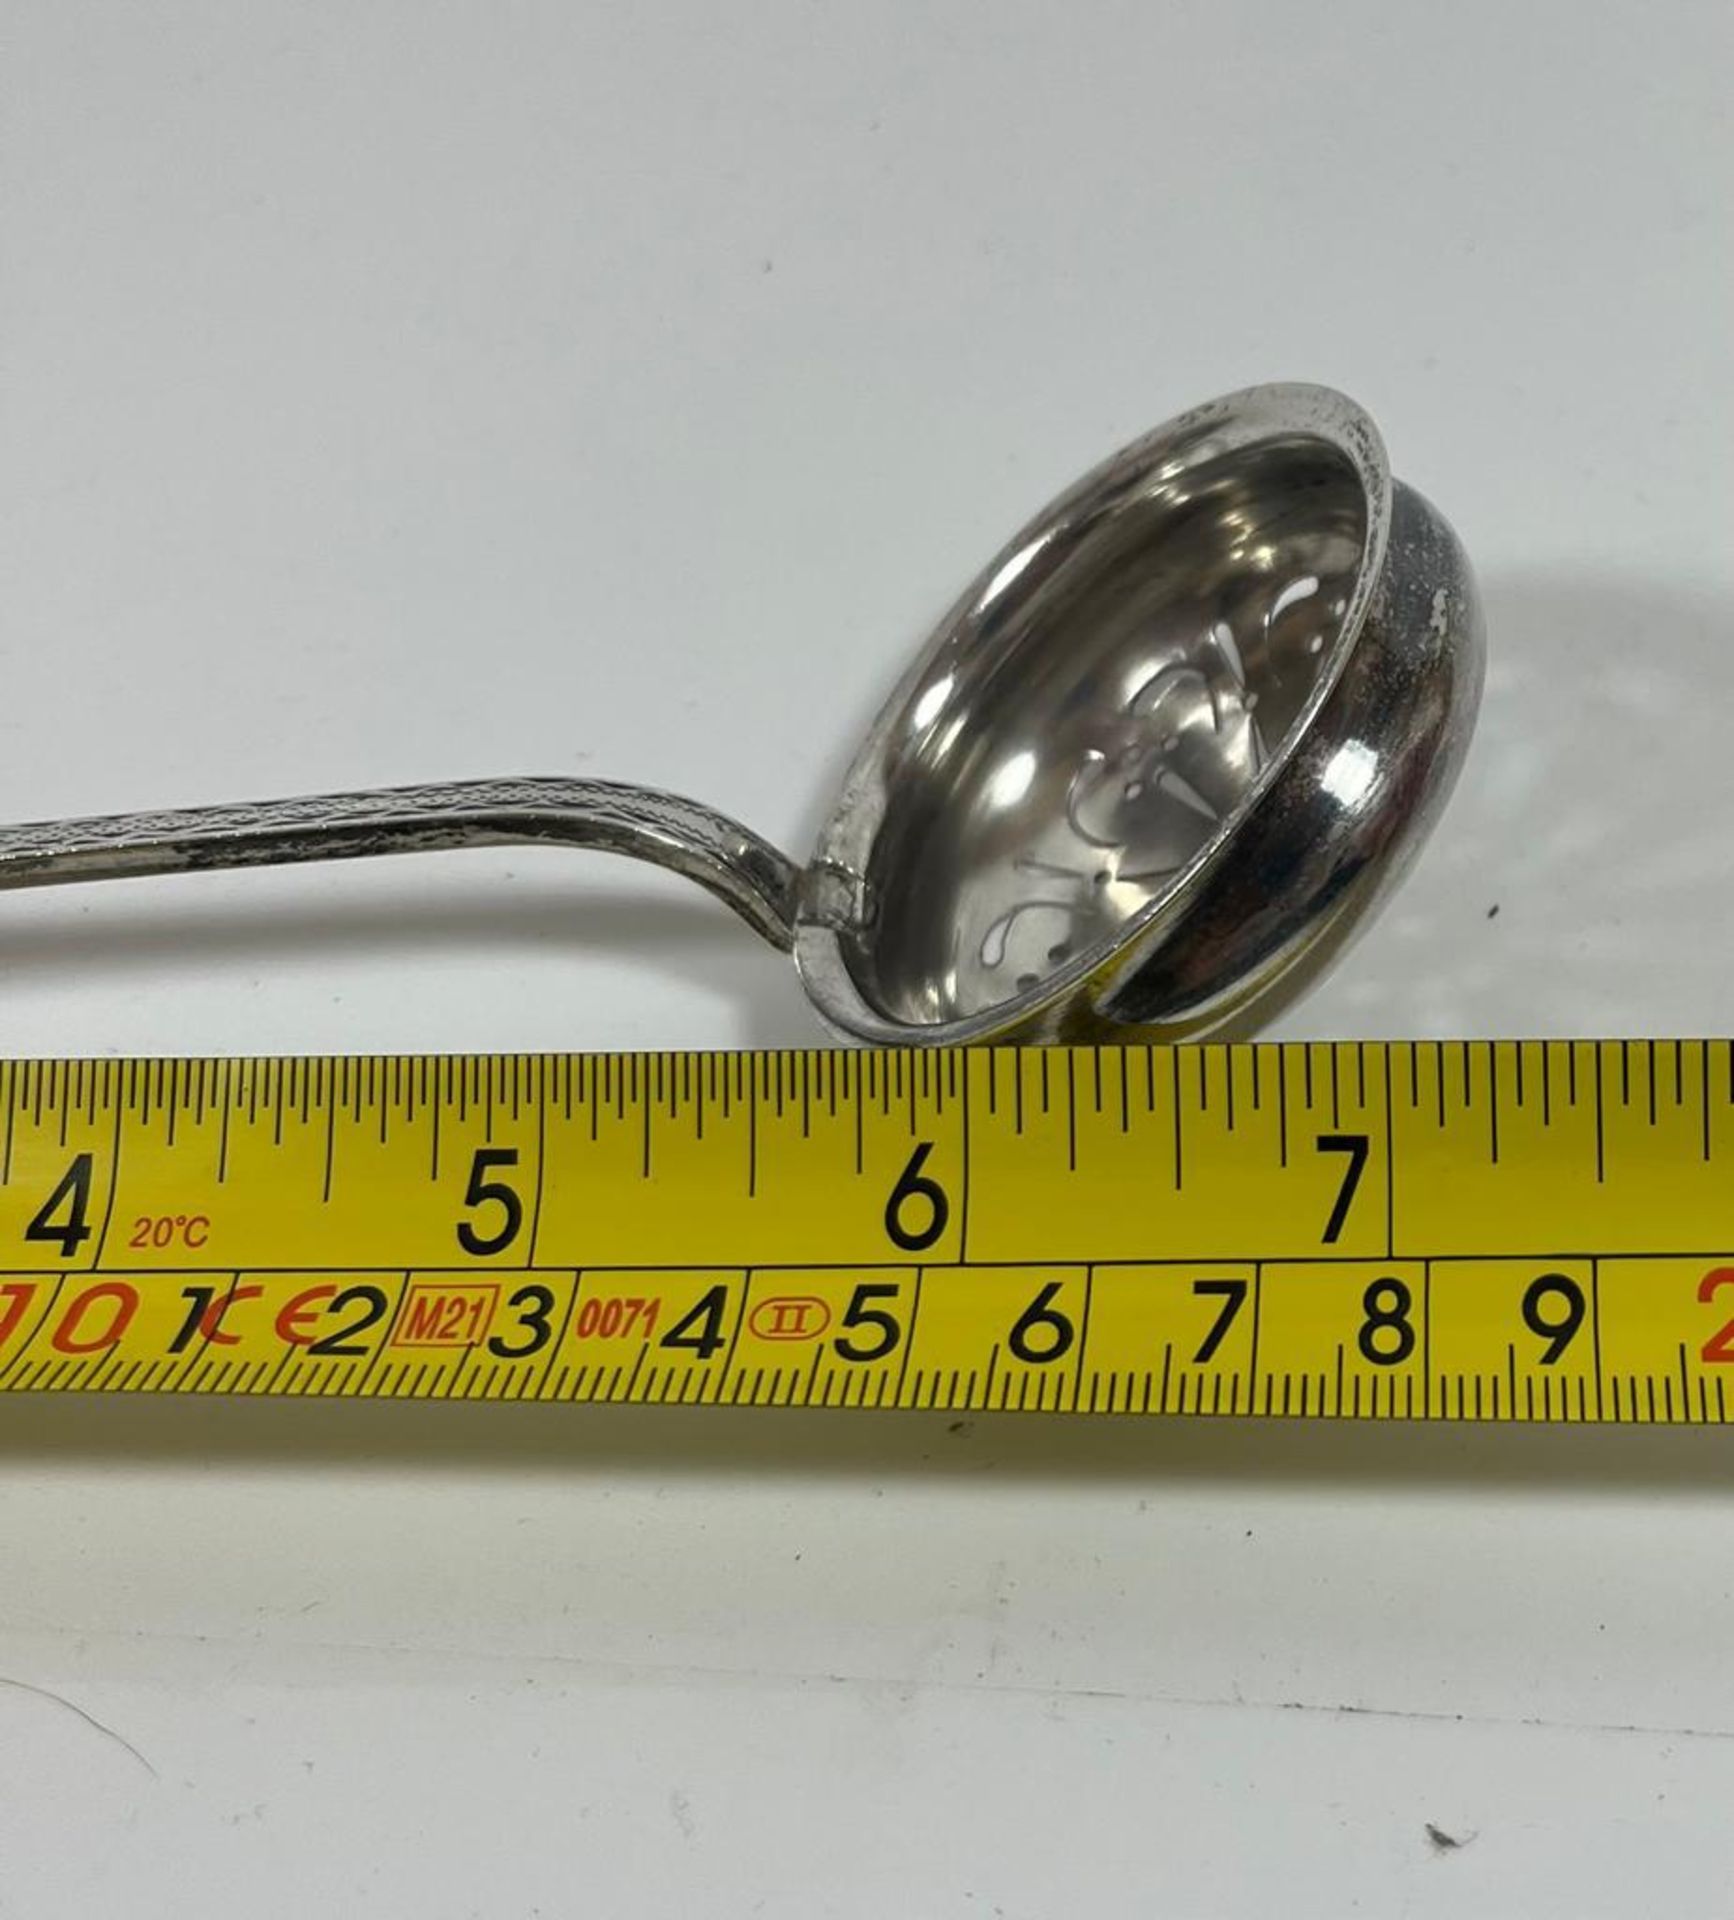 A .99 STAMPED SILVER ANTIQUE SUGAR SIFTER, LENGTH 18.5 CM - Image 7 of 7